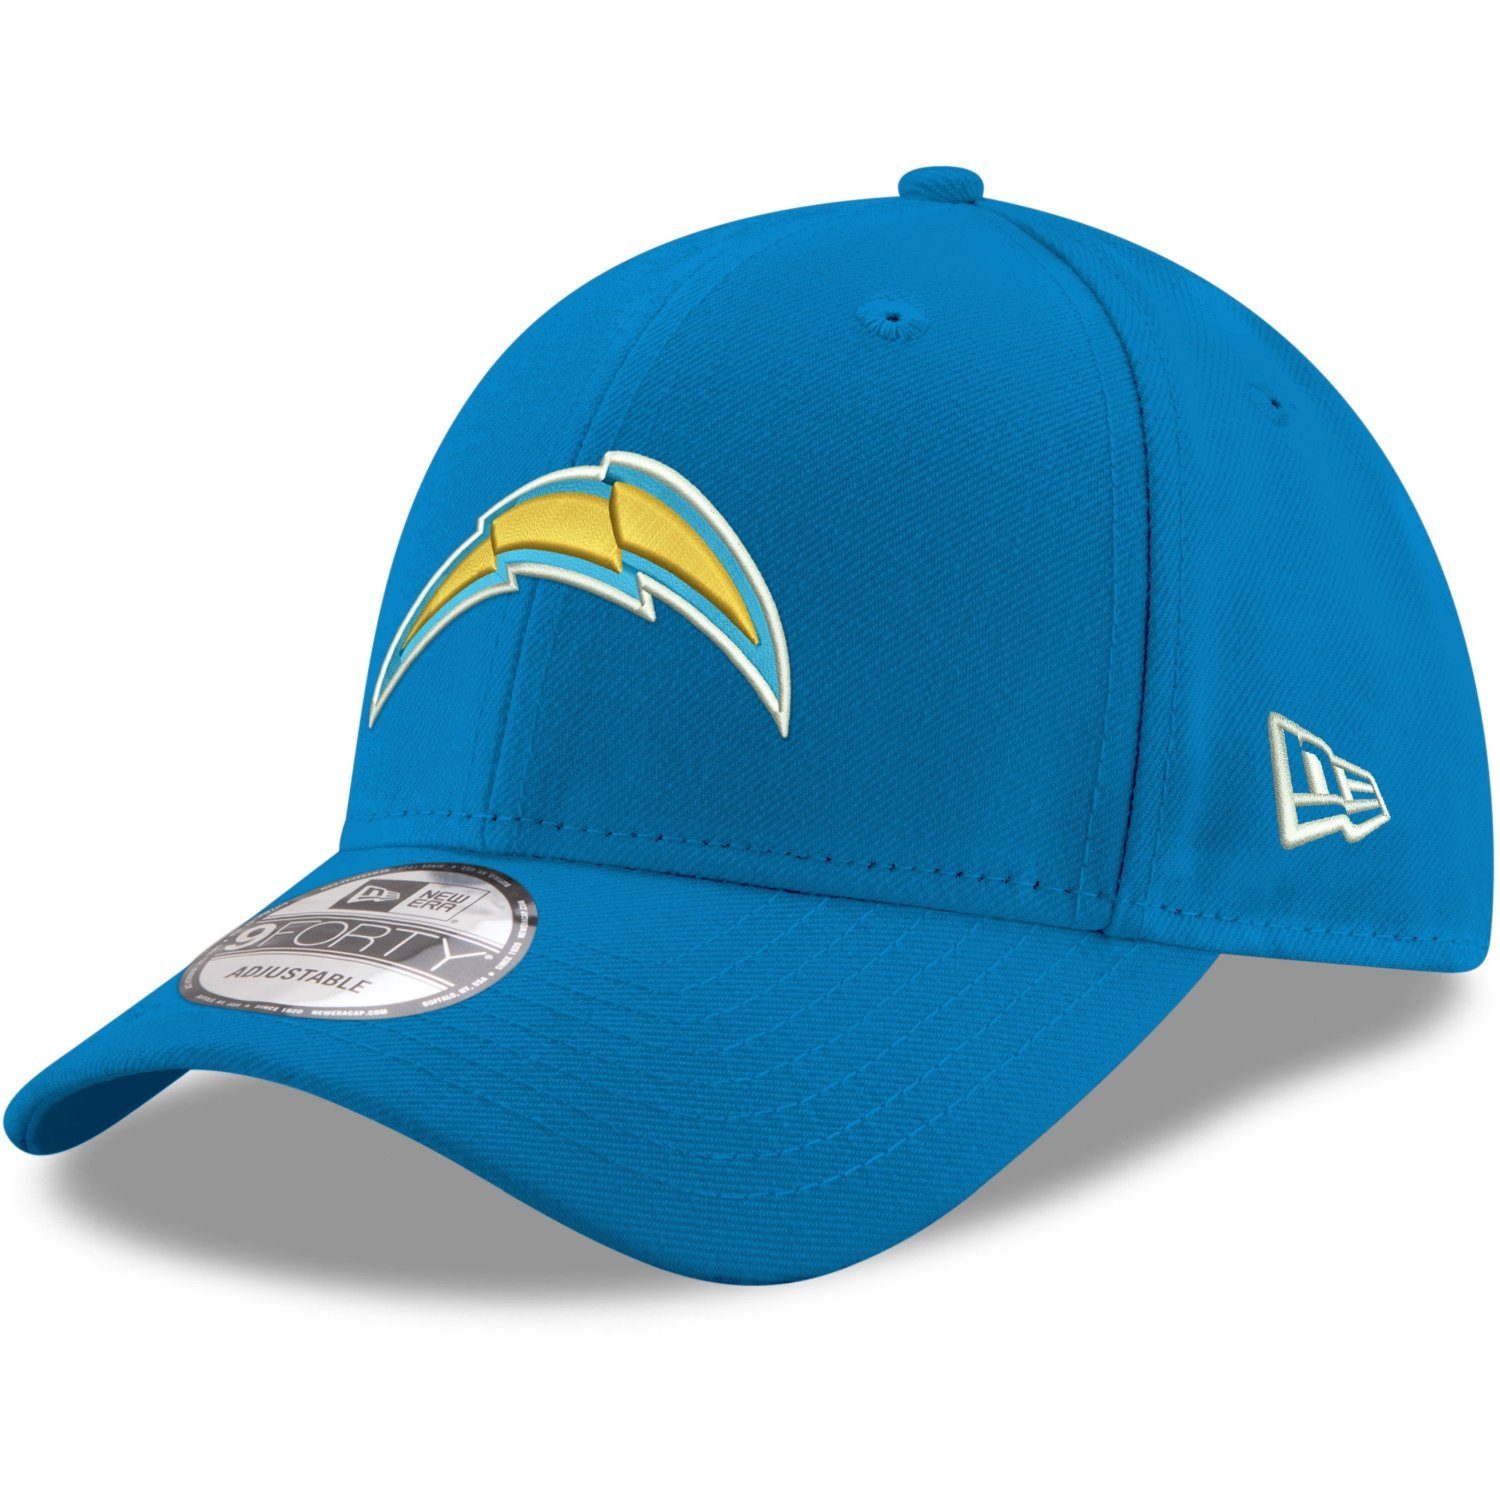 New Era Trucker Cap 9Forty NFL LEAGUE Los Angeles Chargers